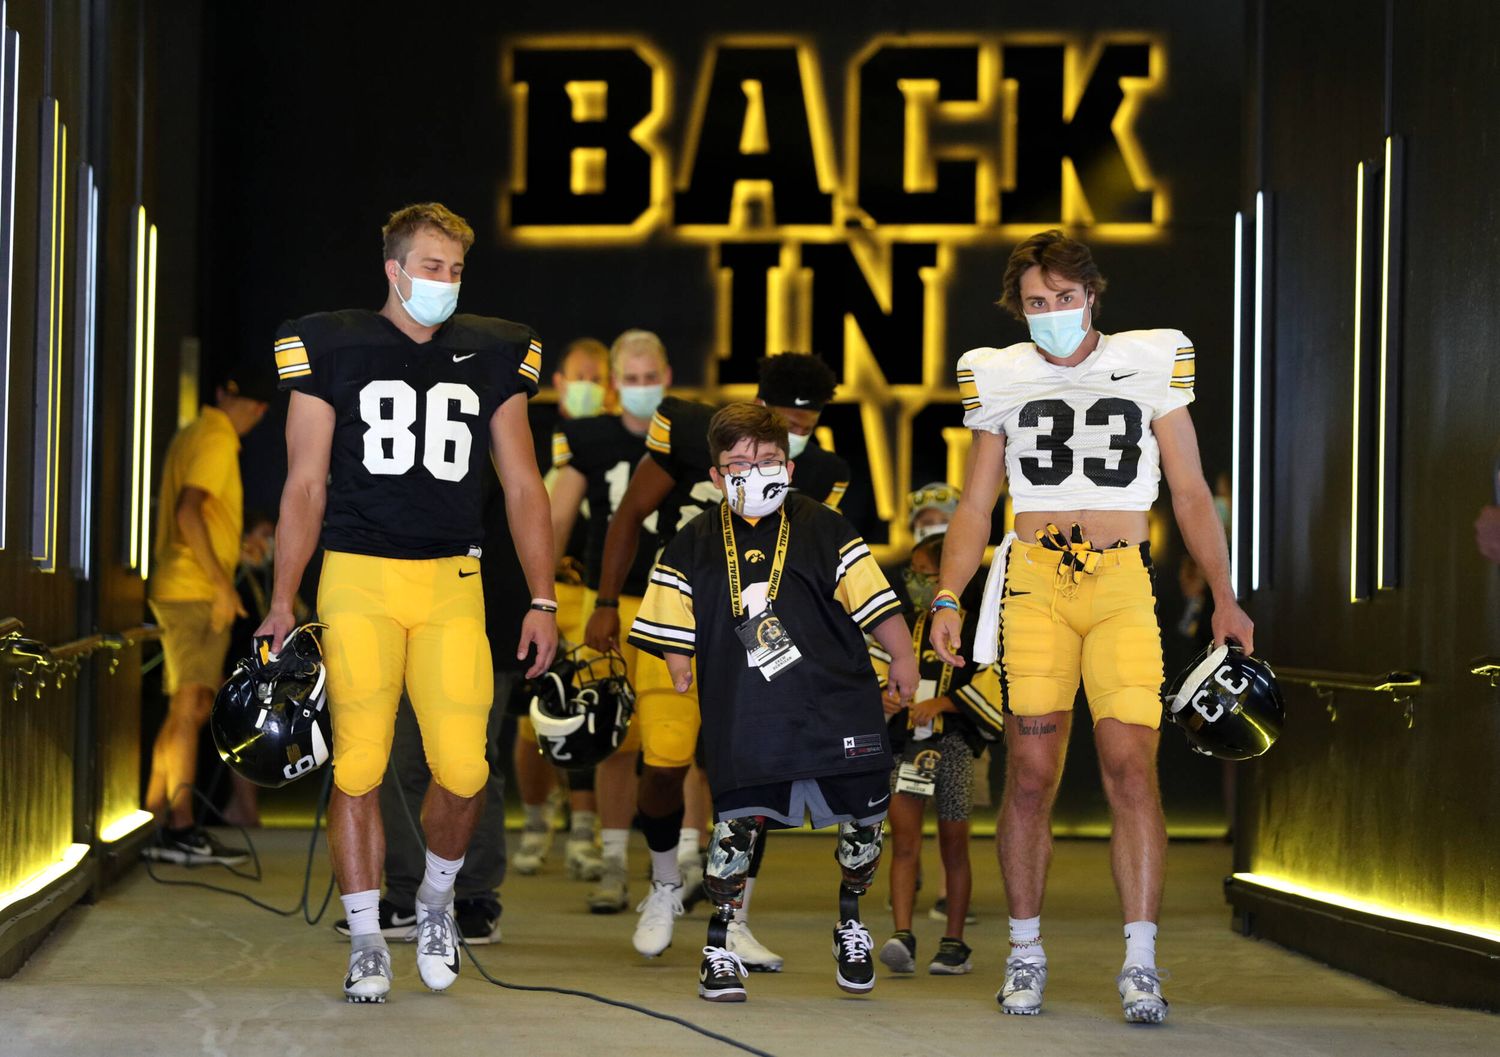 “KIDS’ Day AT KINNICK” Announced; JUNIOR HAWK CLUB Registrations Now